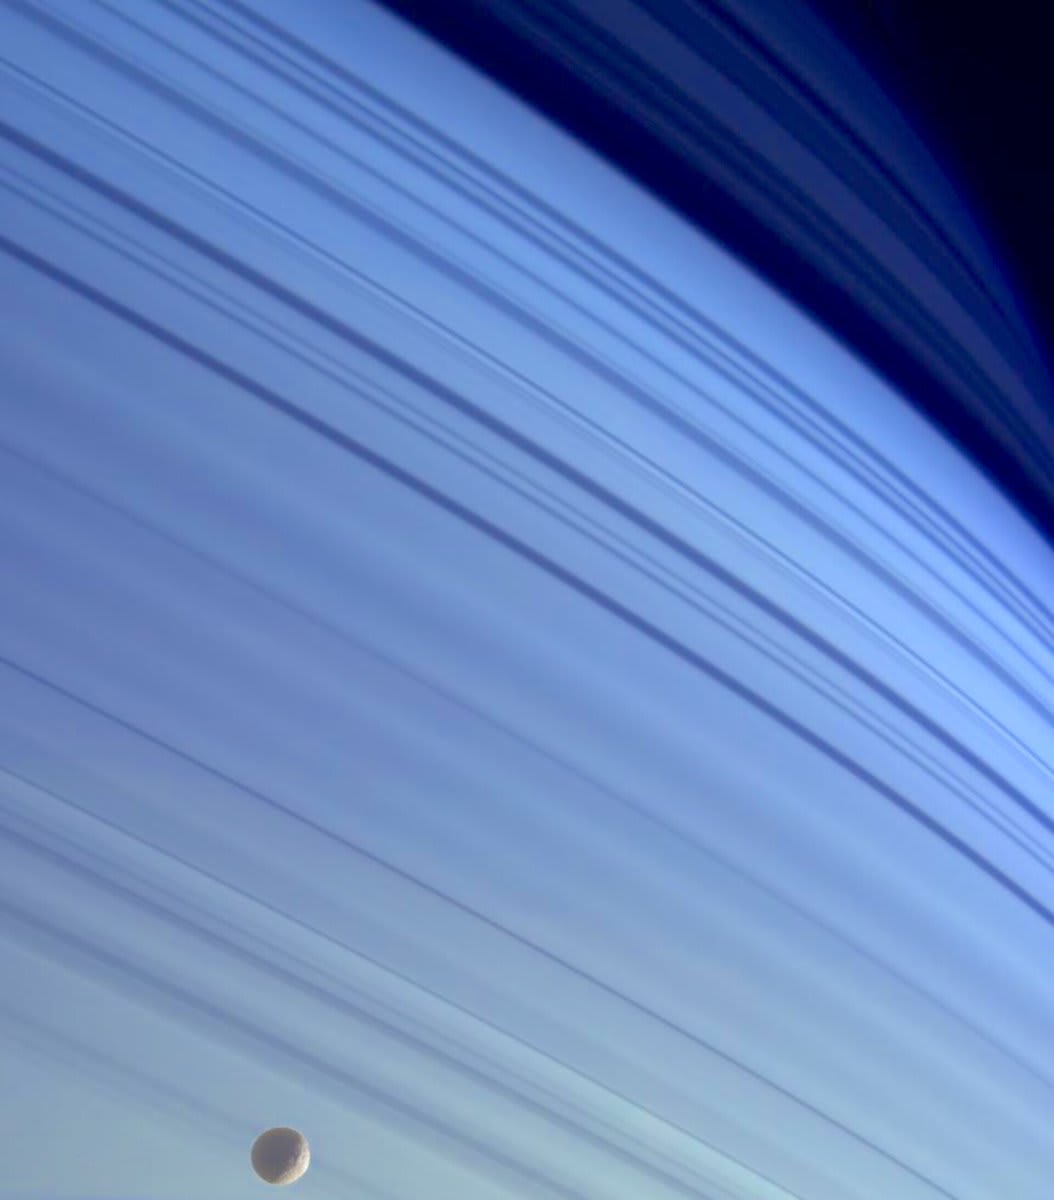 Iconic images of space No.35 This is the moon Mimas against the blue backdrop of Saturn taken by the NASA/ESA/ASI Cassini spacecraft on 18 January 2005